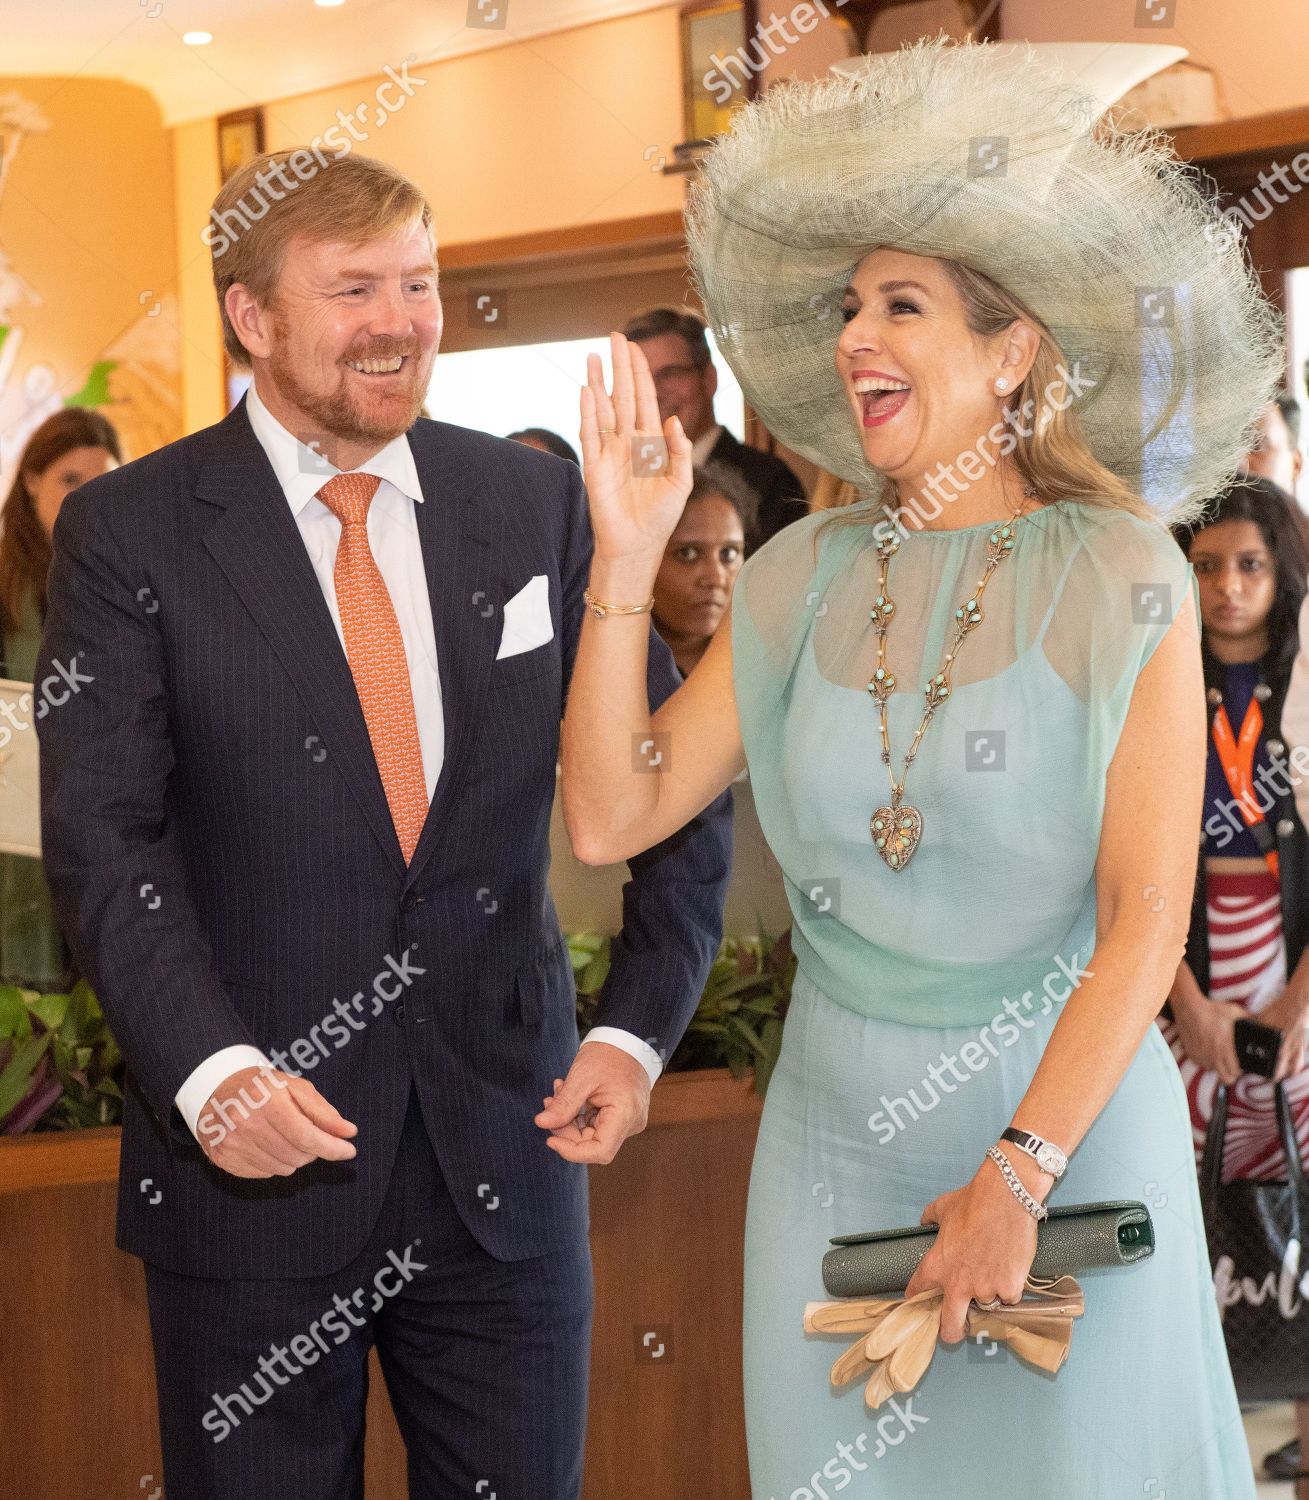 dutch-royals-state-visit-to-india-shutterstock-editorial-10445503ar.jpg